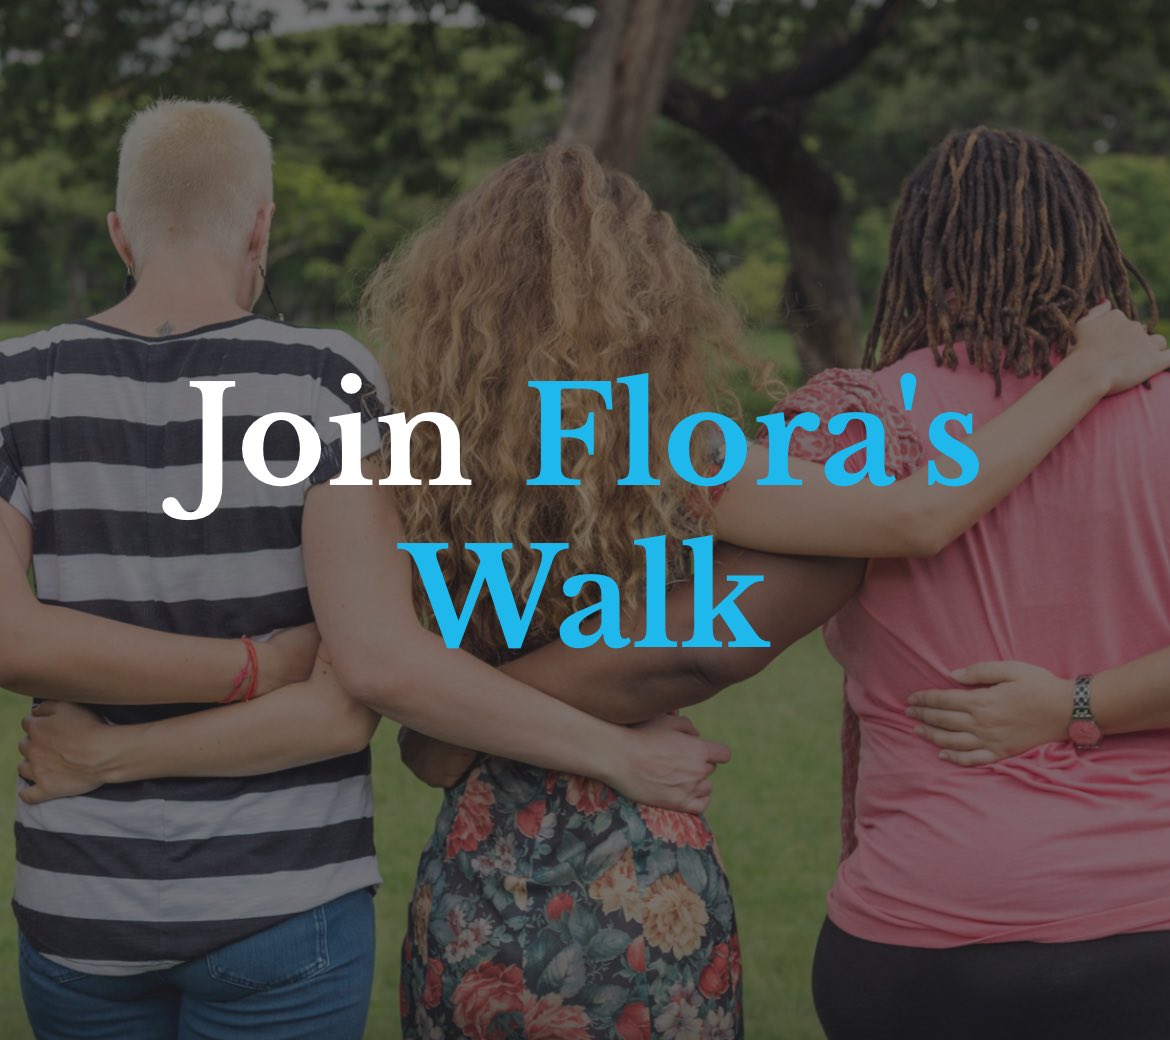 At Gibbons Park for Flora’s Walk today. This event raises awareness about mental health challenges impacting mothers during pregnancy and following birth such as anxiety, postpartum depression and more. An incredibly important cause. Learn more: floraswalk.ca/en/ #ldnont